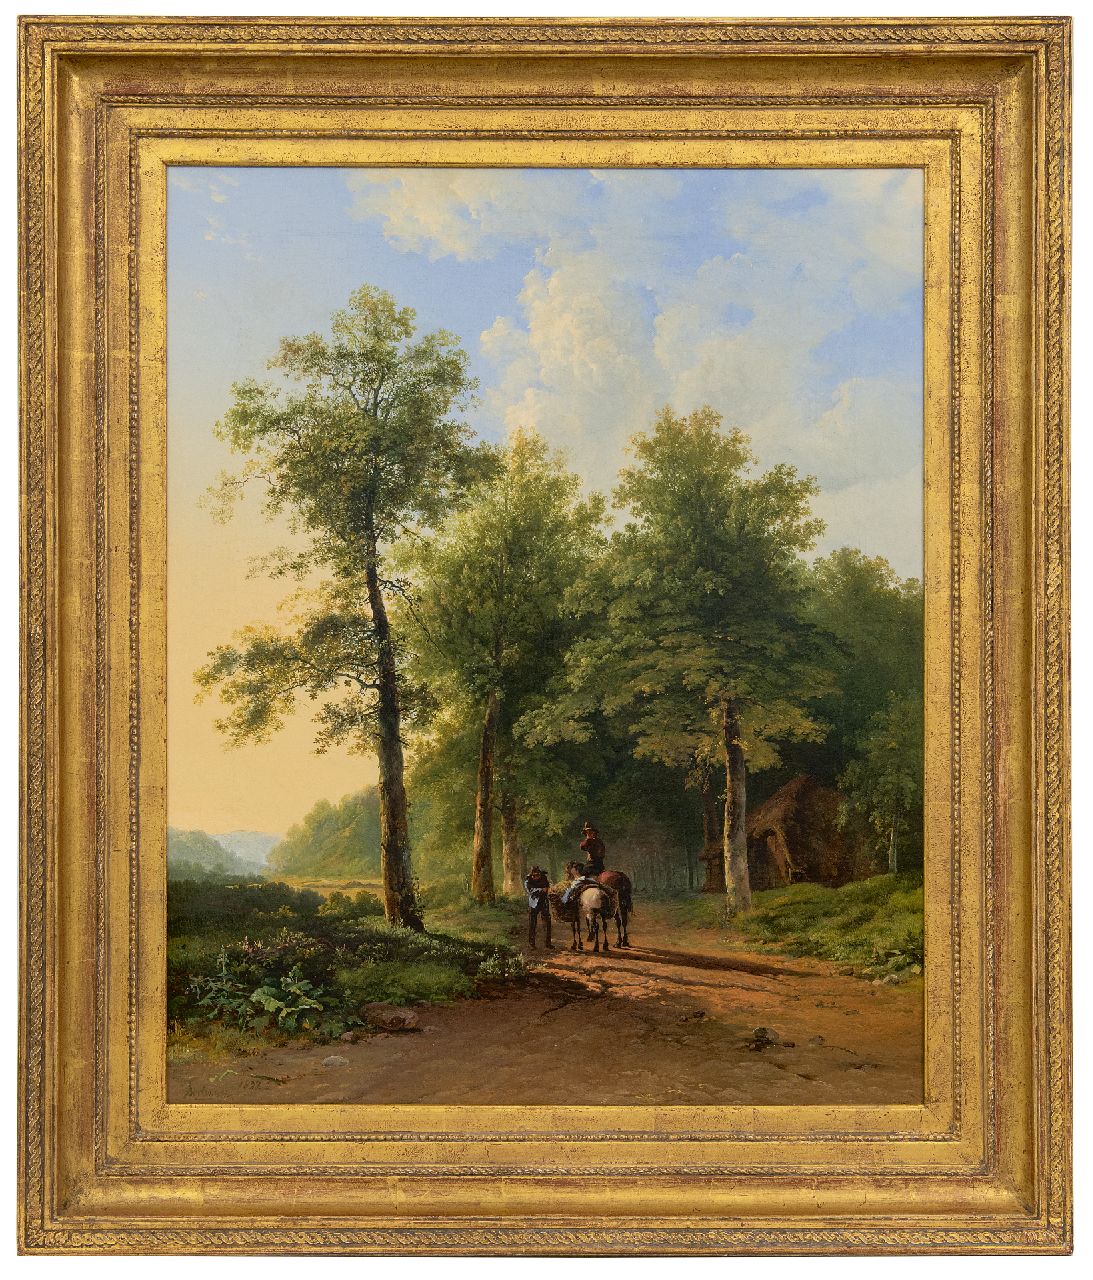 Bodeman W.  | Willem Bodeman | Paintings offered for sale | Landscape with country folk and horses on a late summer day, oil on canvas 67.2 x 54.6 cm, signed l.l. and dated 1832